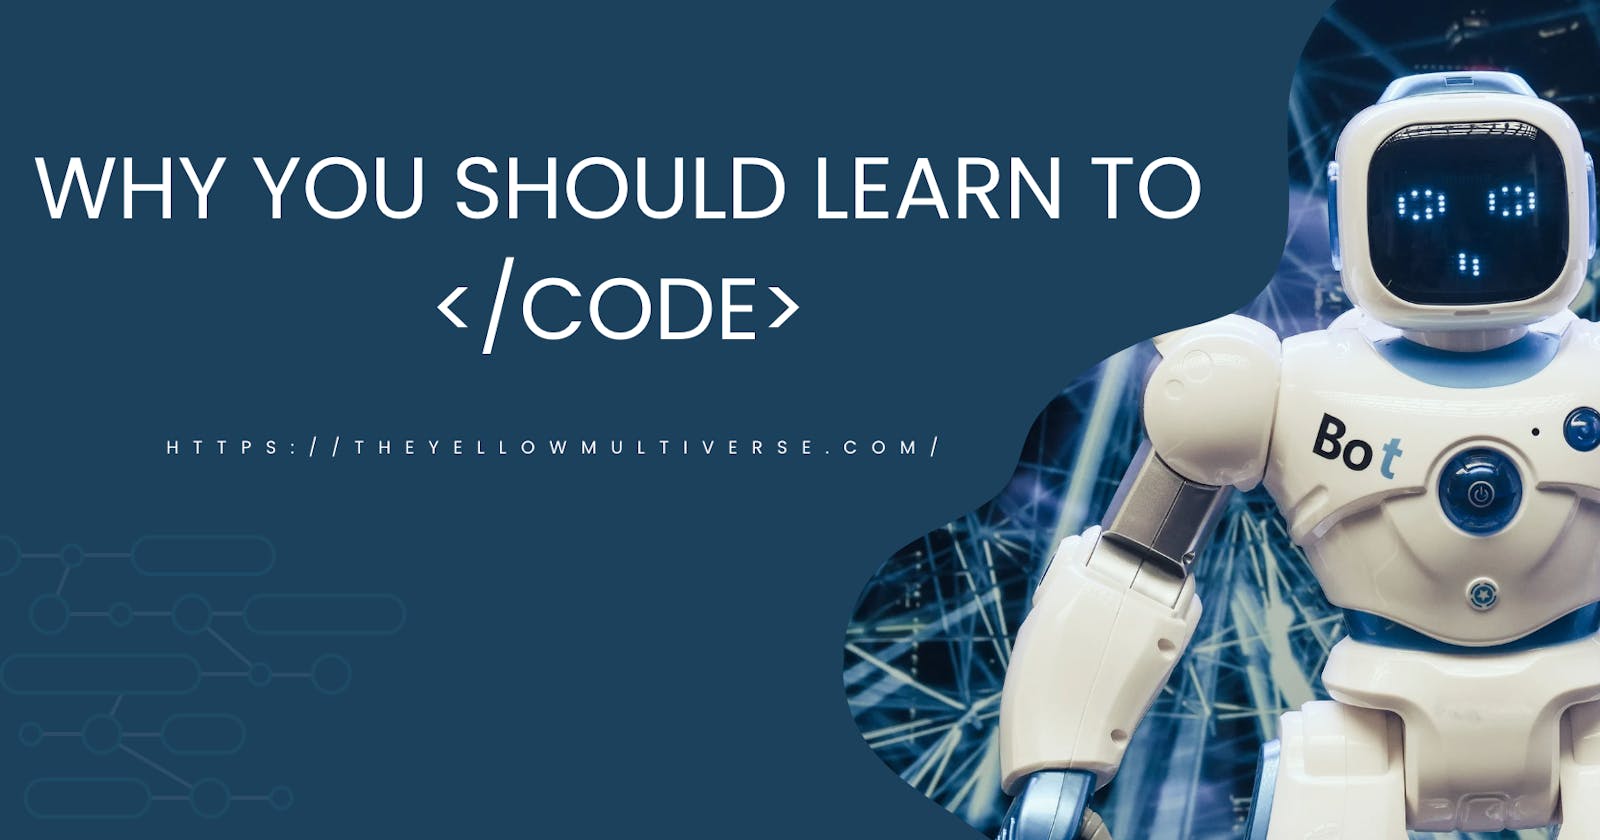 Why should you learn to </code>